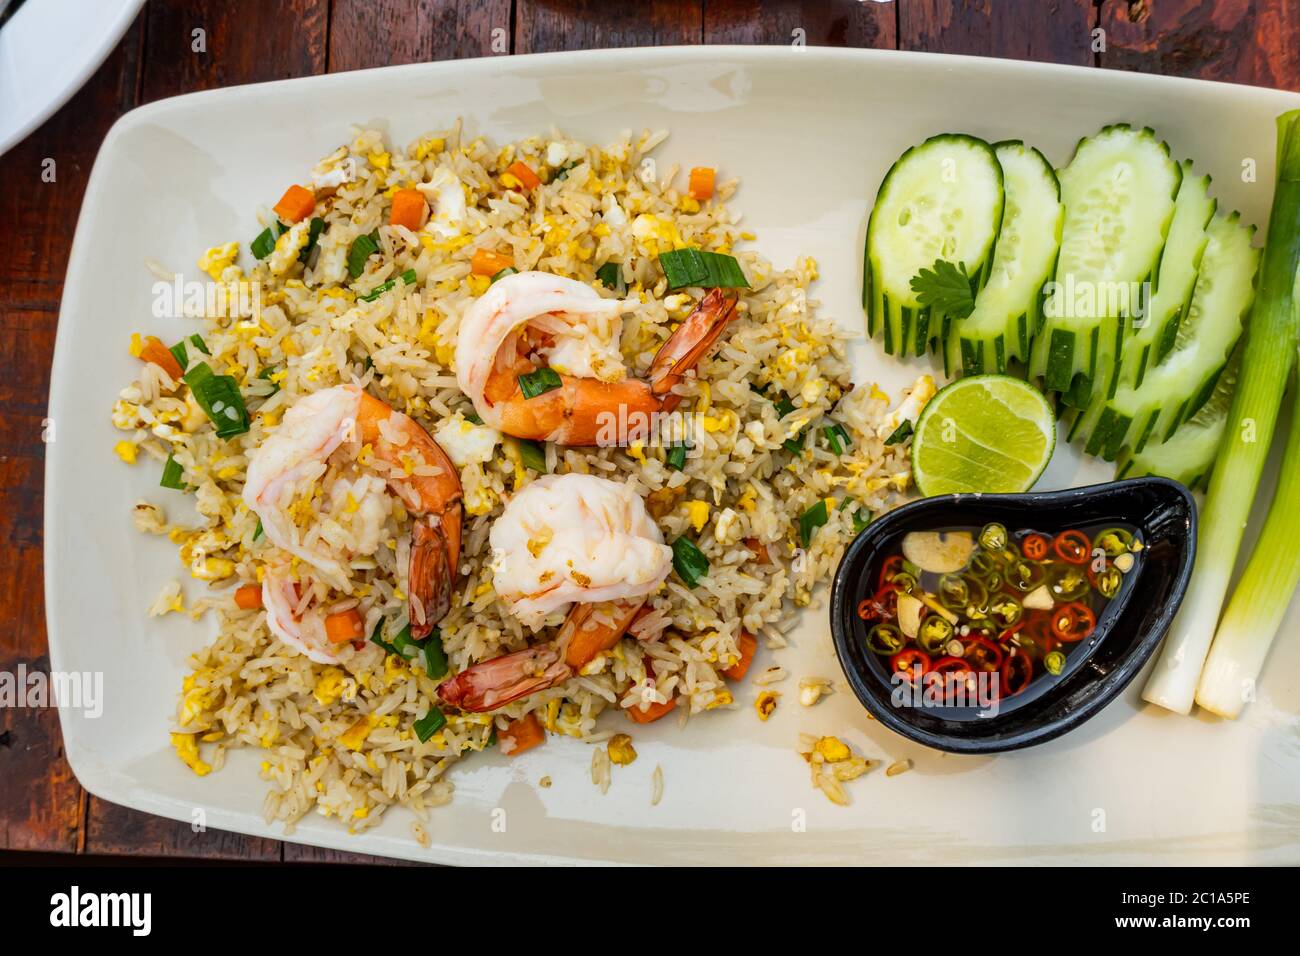 Top view of fried rice with shrimp, lemon, cucumber, onion and chili fish sauce in white plate. Stock Photo